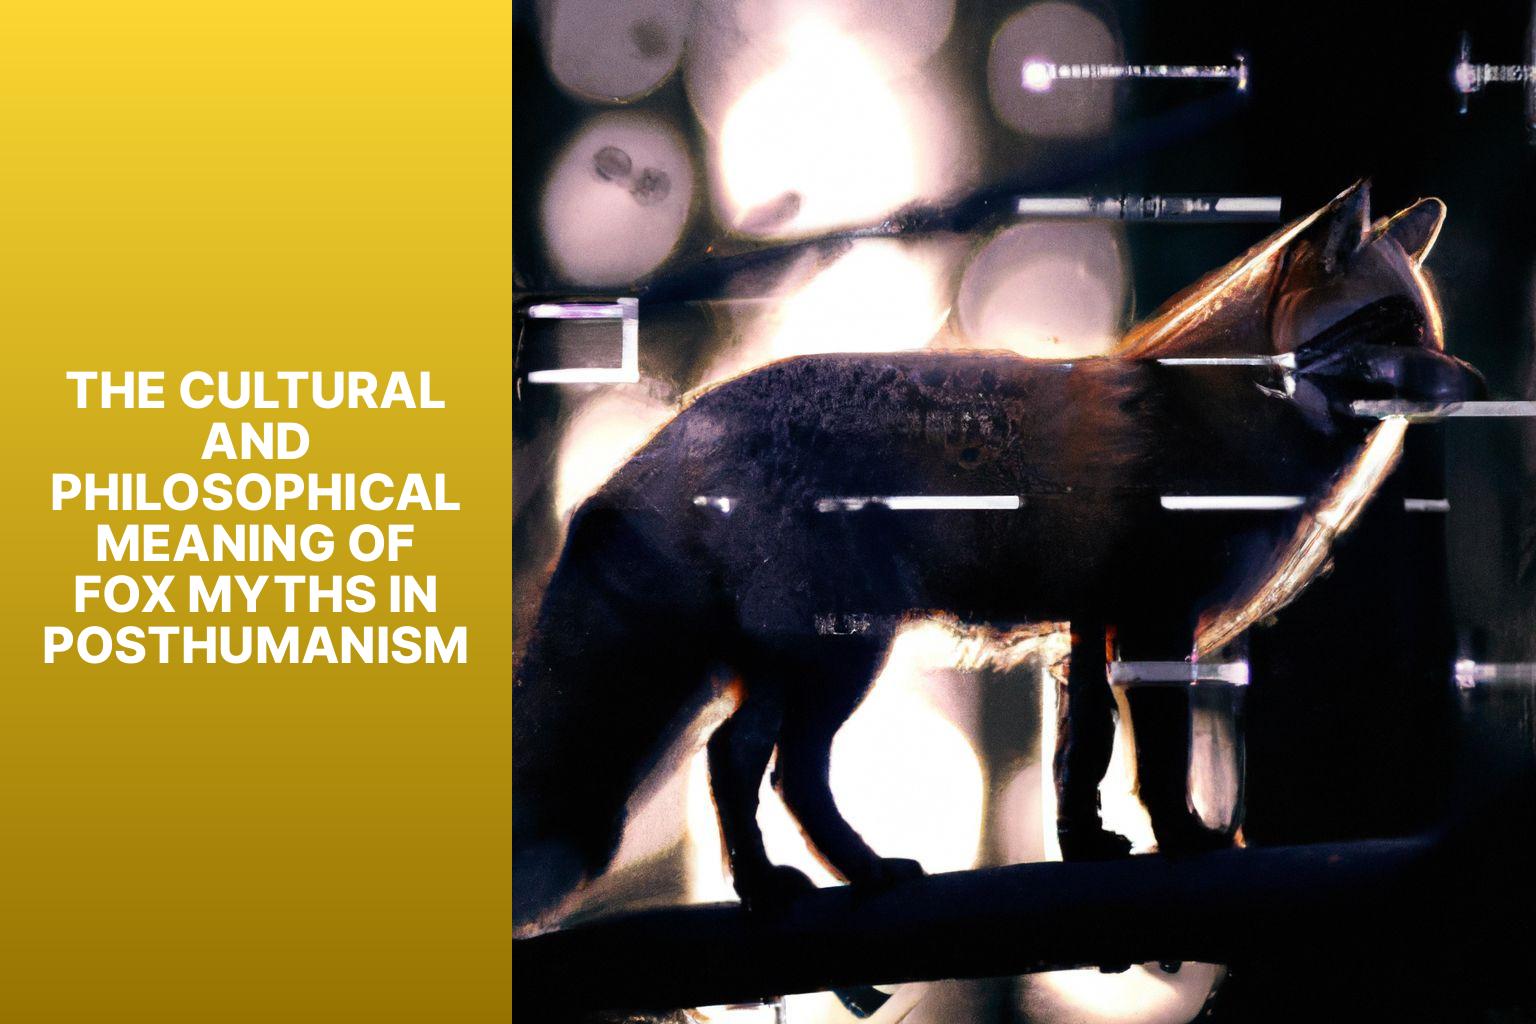 The Cultural and Philosophical Meaning of Fox Myths in Posthumanism - Fox Myths in Posthumanism 